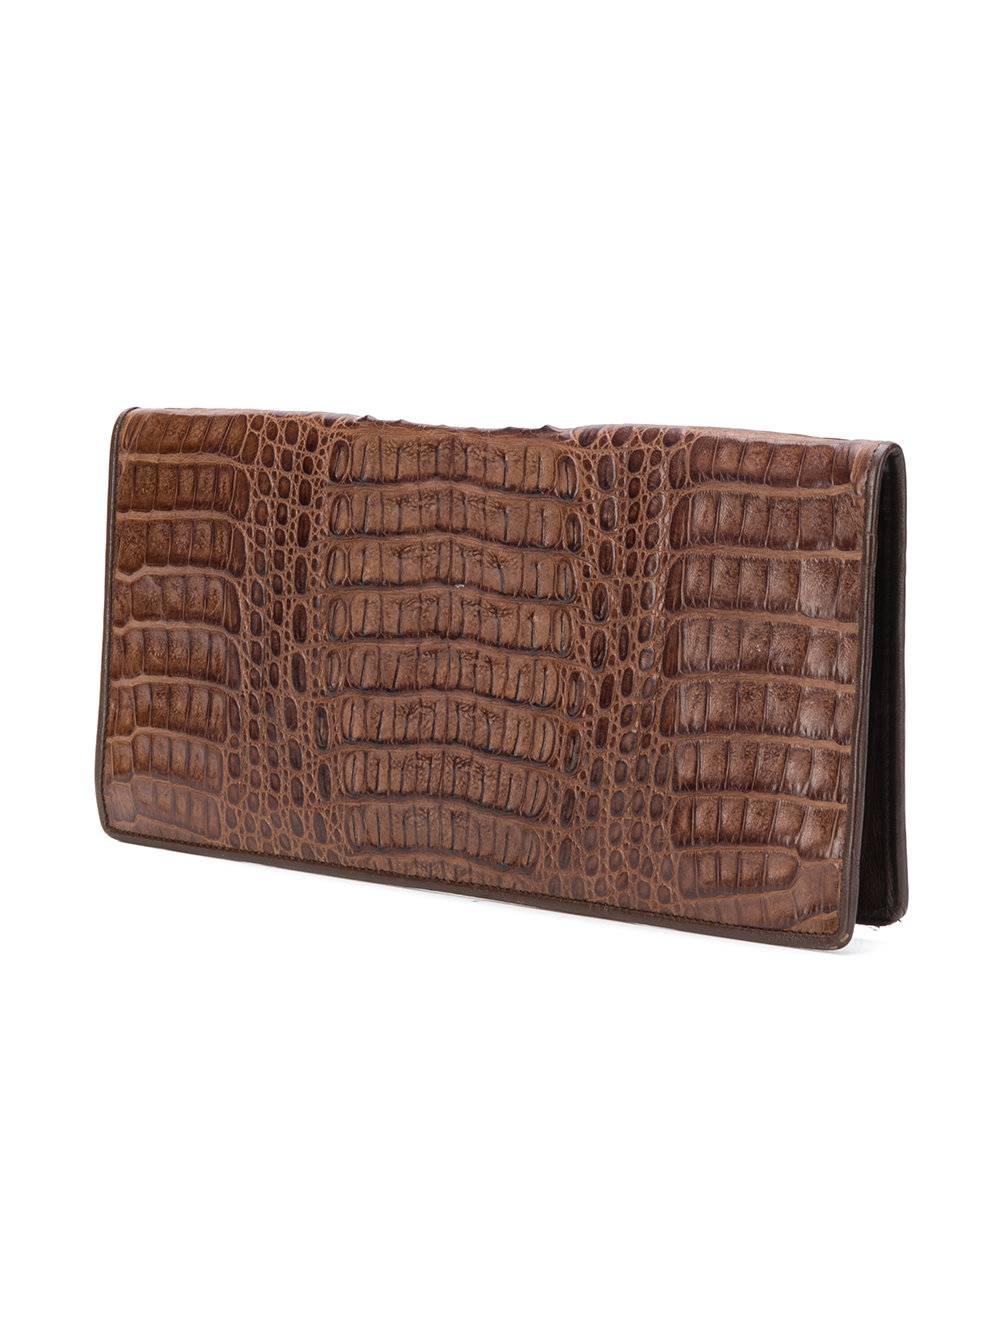 A timeless vintage clutch crafted from an exquisite and unusually patterned brown crocodile leather, offset with a co-ordinated leather lining. It opens with a magnetic fastening, and features an interior pocket lined with brown satin, and a small